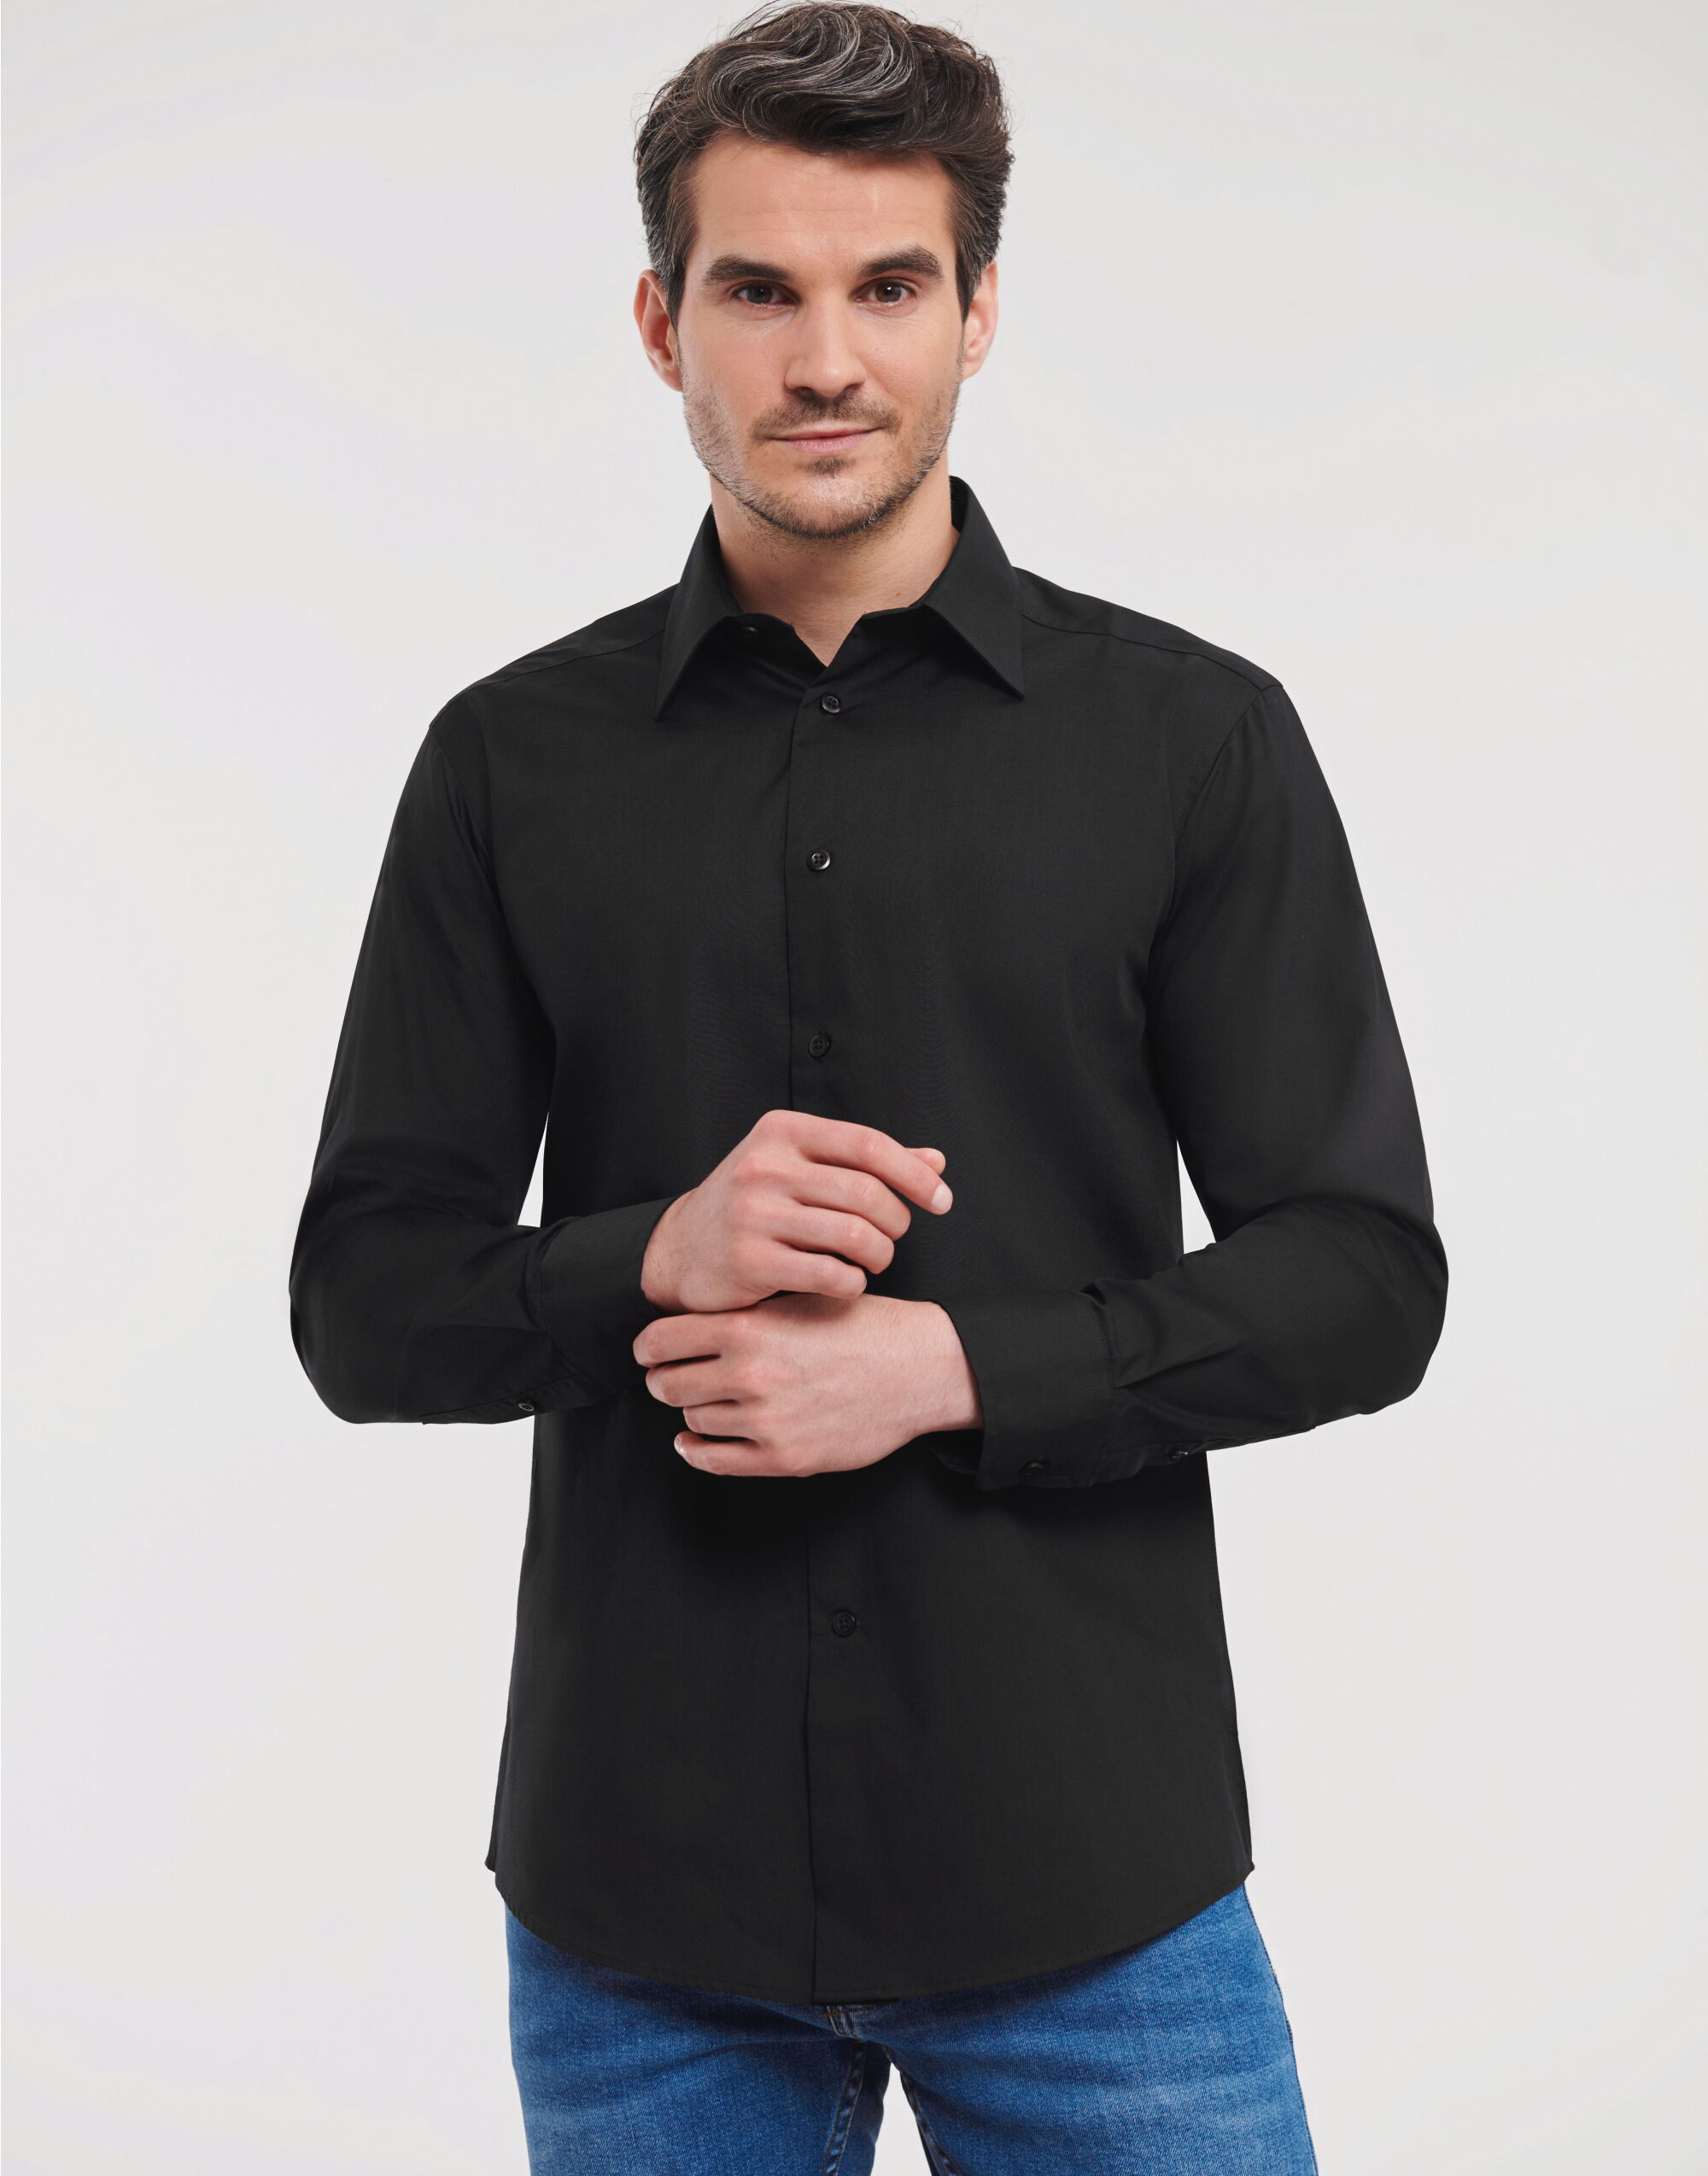 Picture of Men's Long Sleeve Tailored Polycotton Poplin Shirt